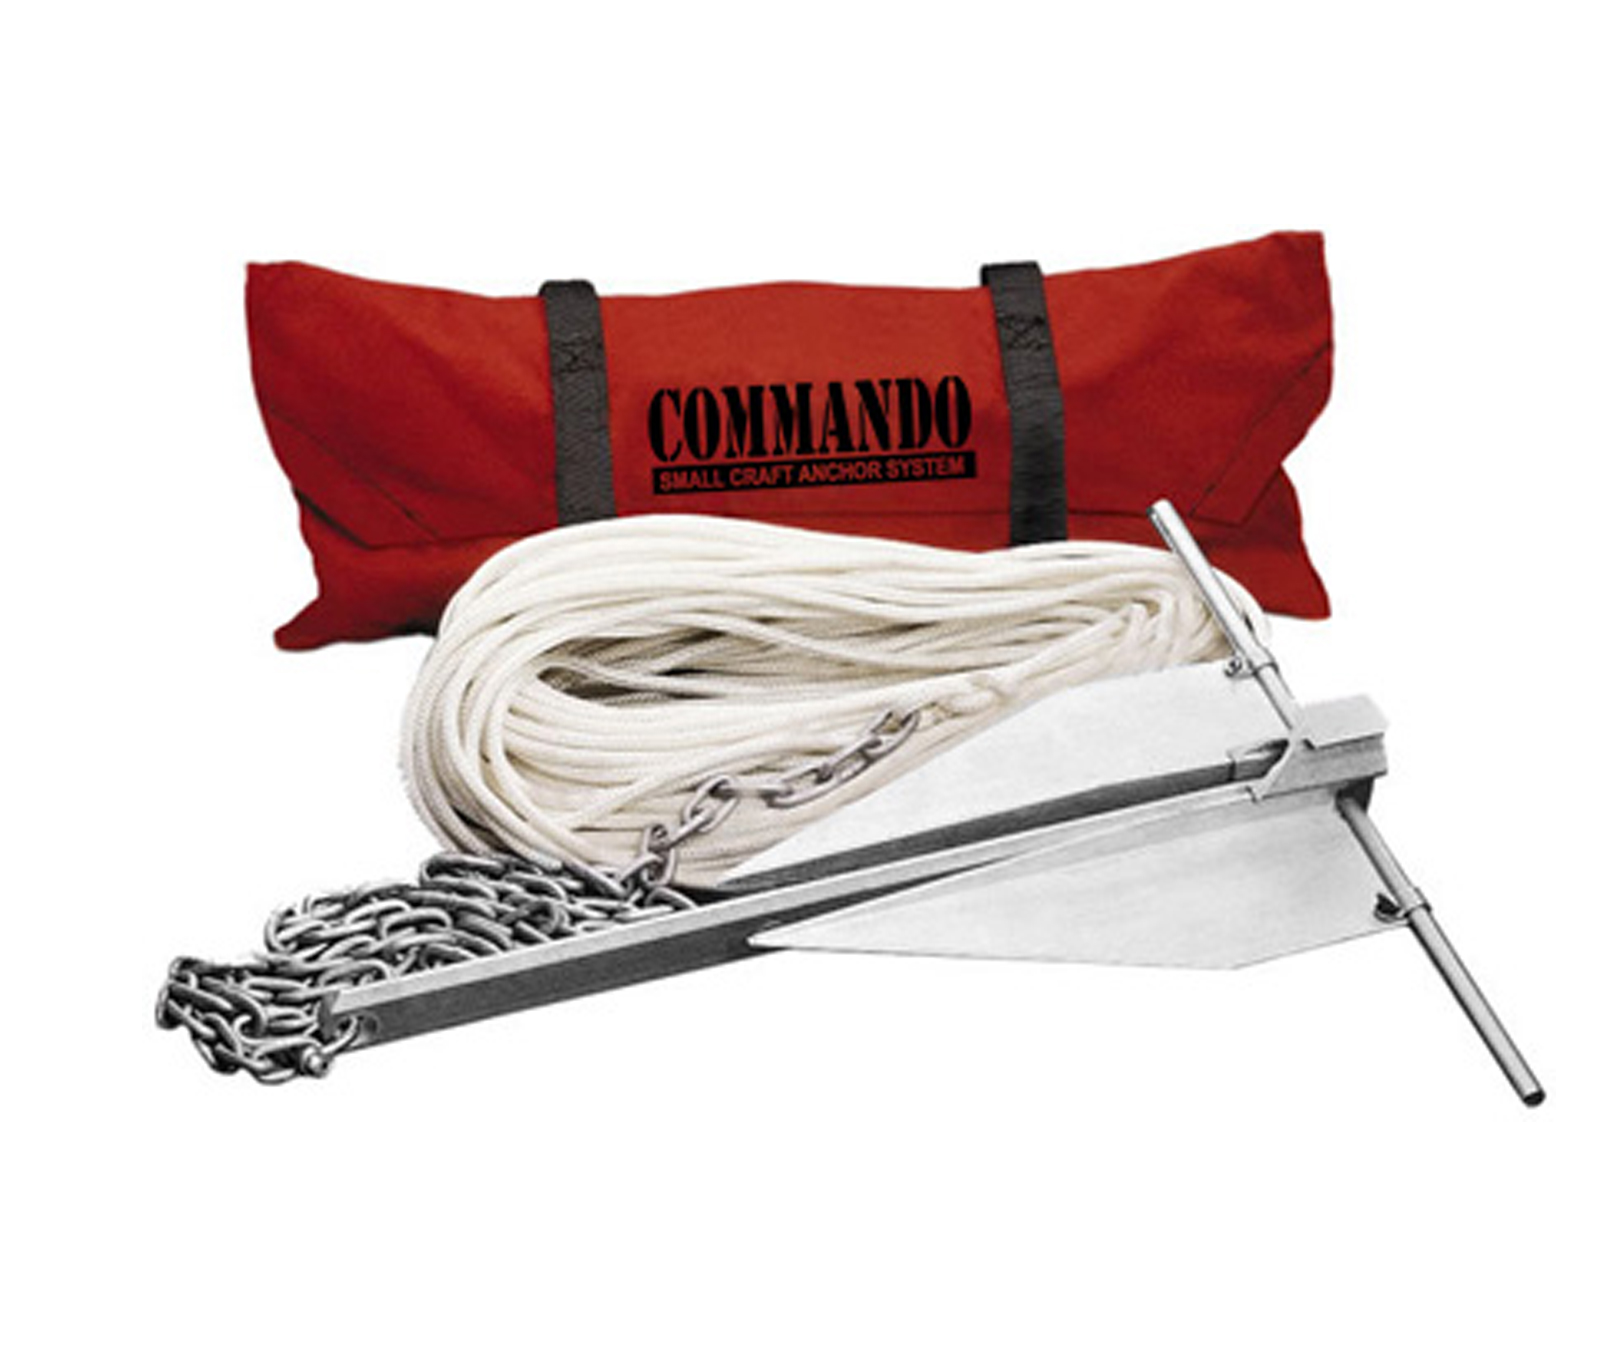 Fortress Commando Small Craft Anchoring System - Fortress Anchors